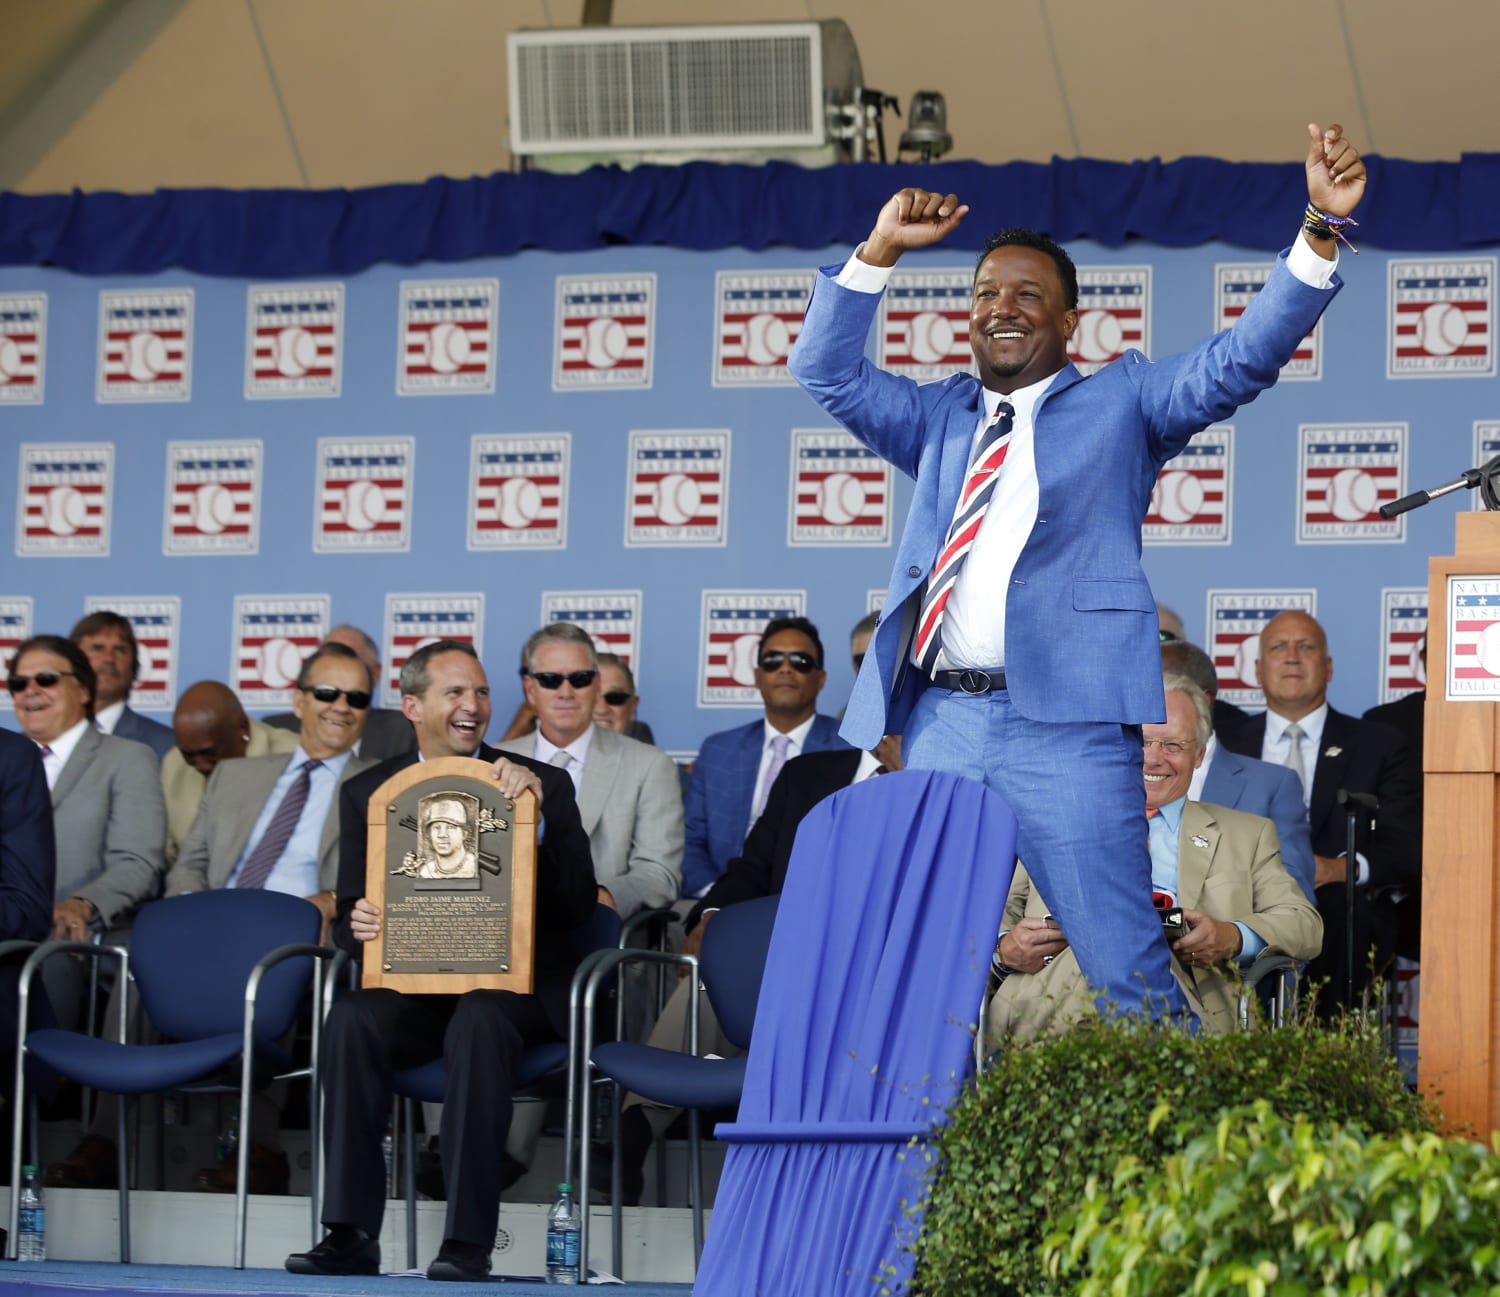 Dominican Pride: Pedro Martinez Inducted Into Baseball Hall of Fame